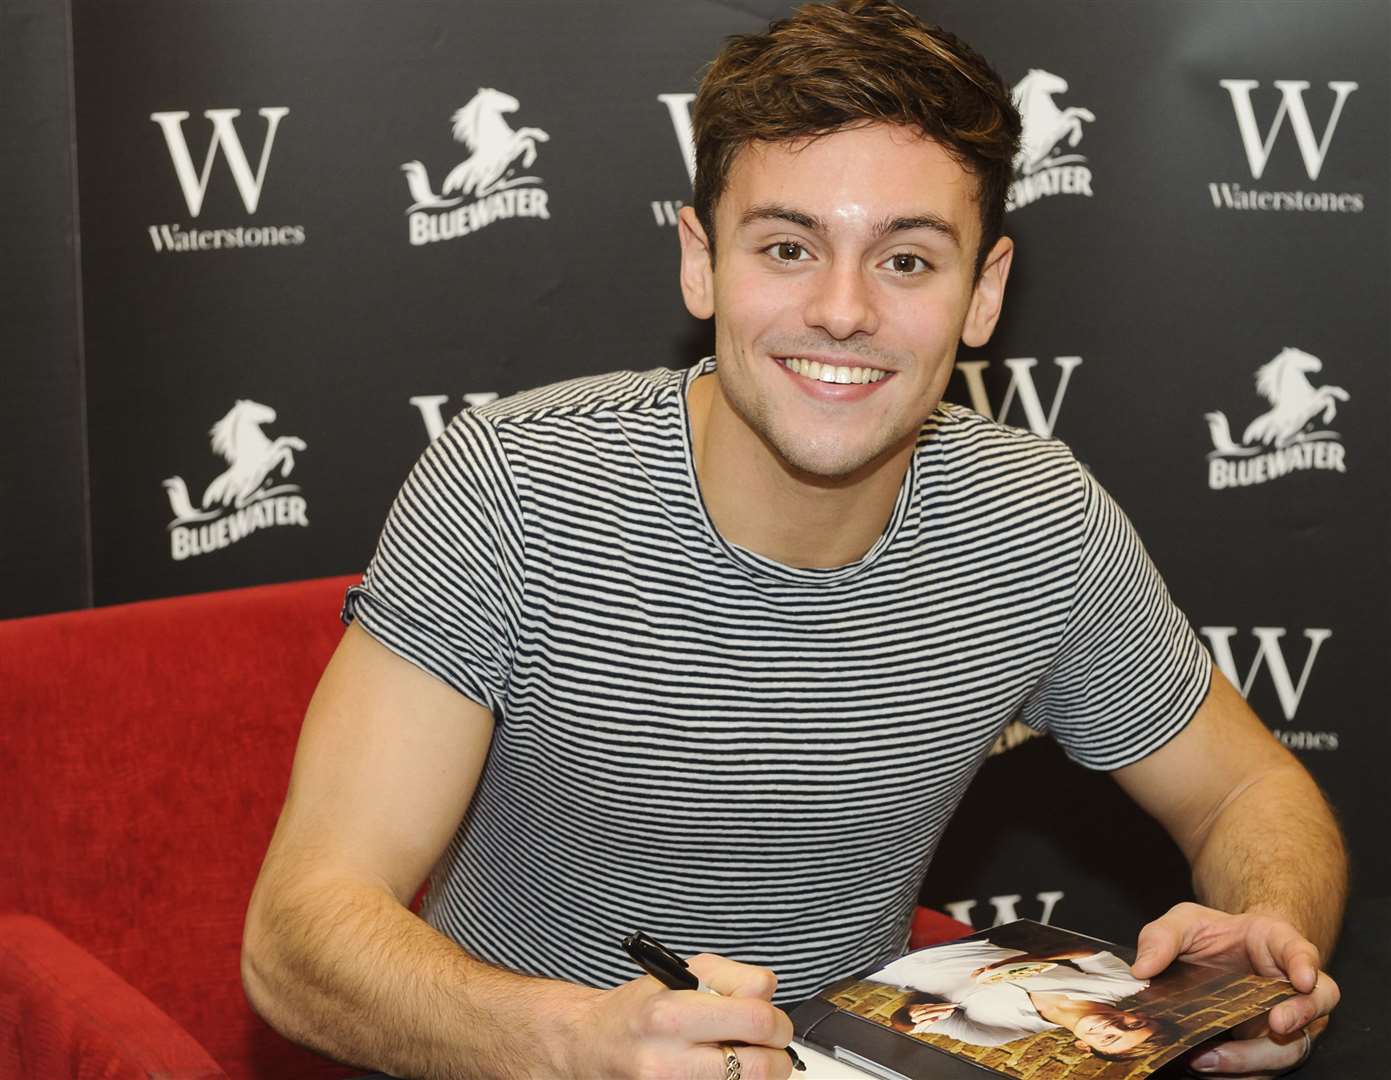 Olympic diver and TV presenter Tom Daley